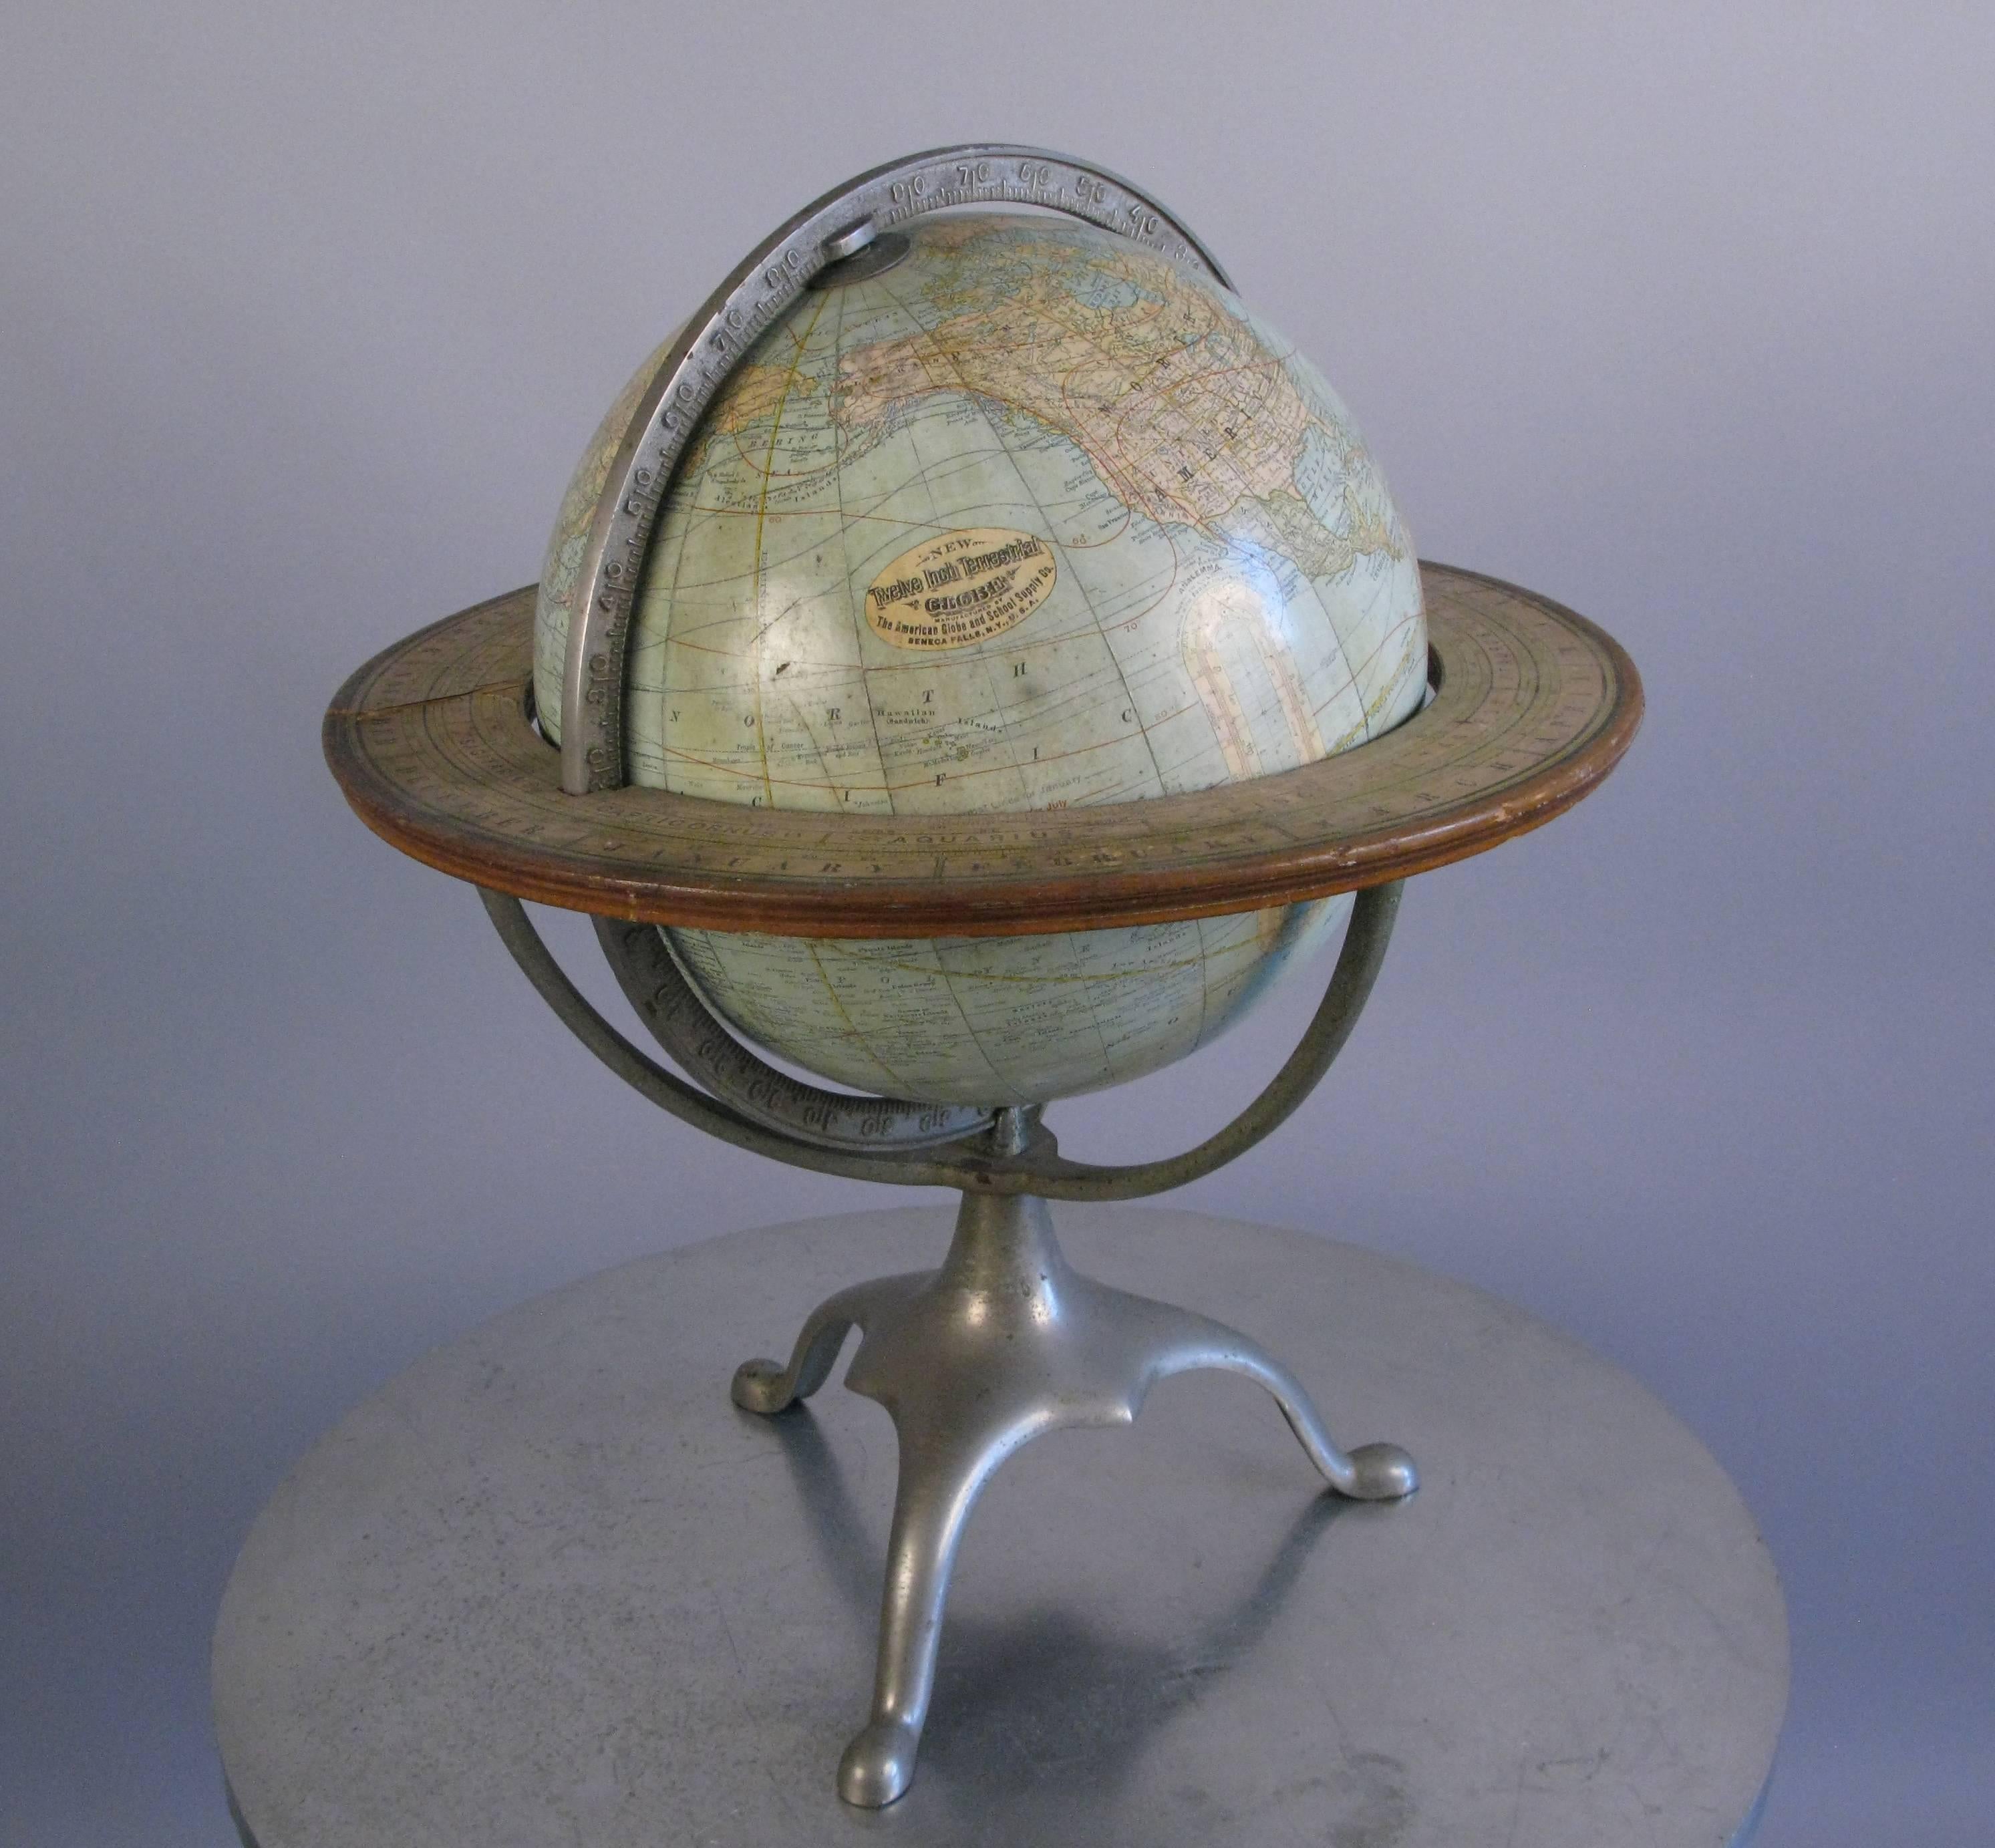 A somewhat rare world globe from 1890s-1900s made by the American Globe and School Supply Co. Seneca Falls, NY. The globe is in very good condition with some wear and the frame is nickel-plated.